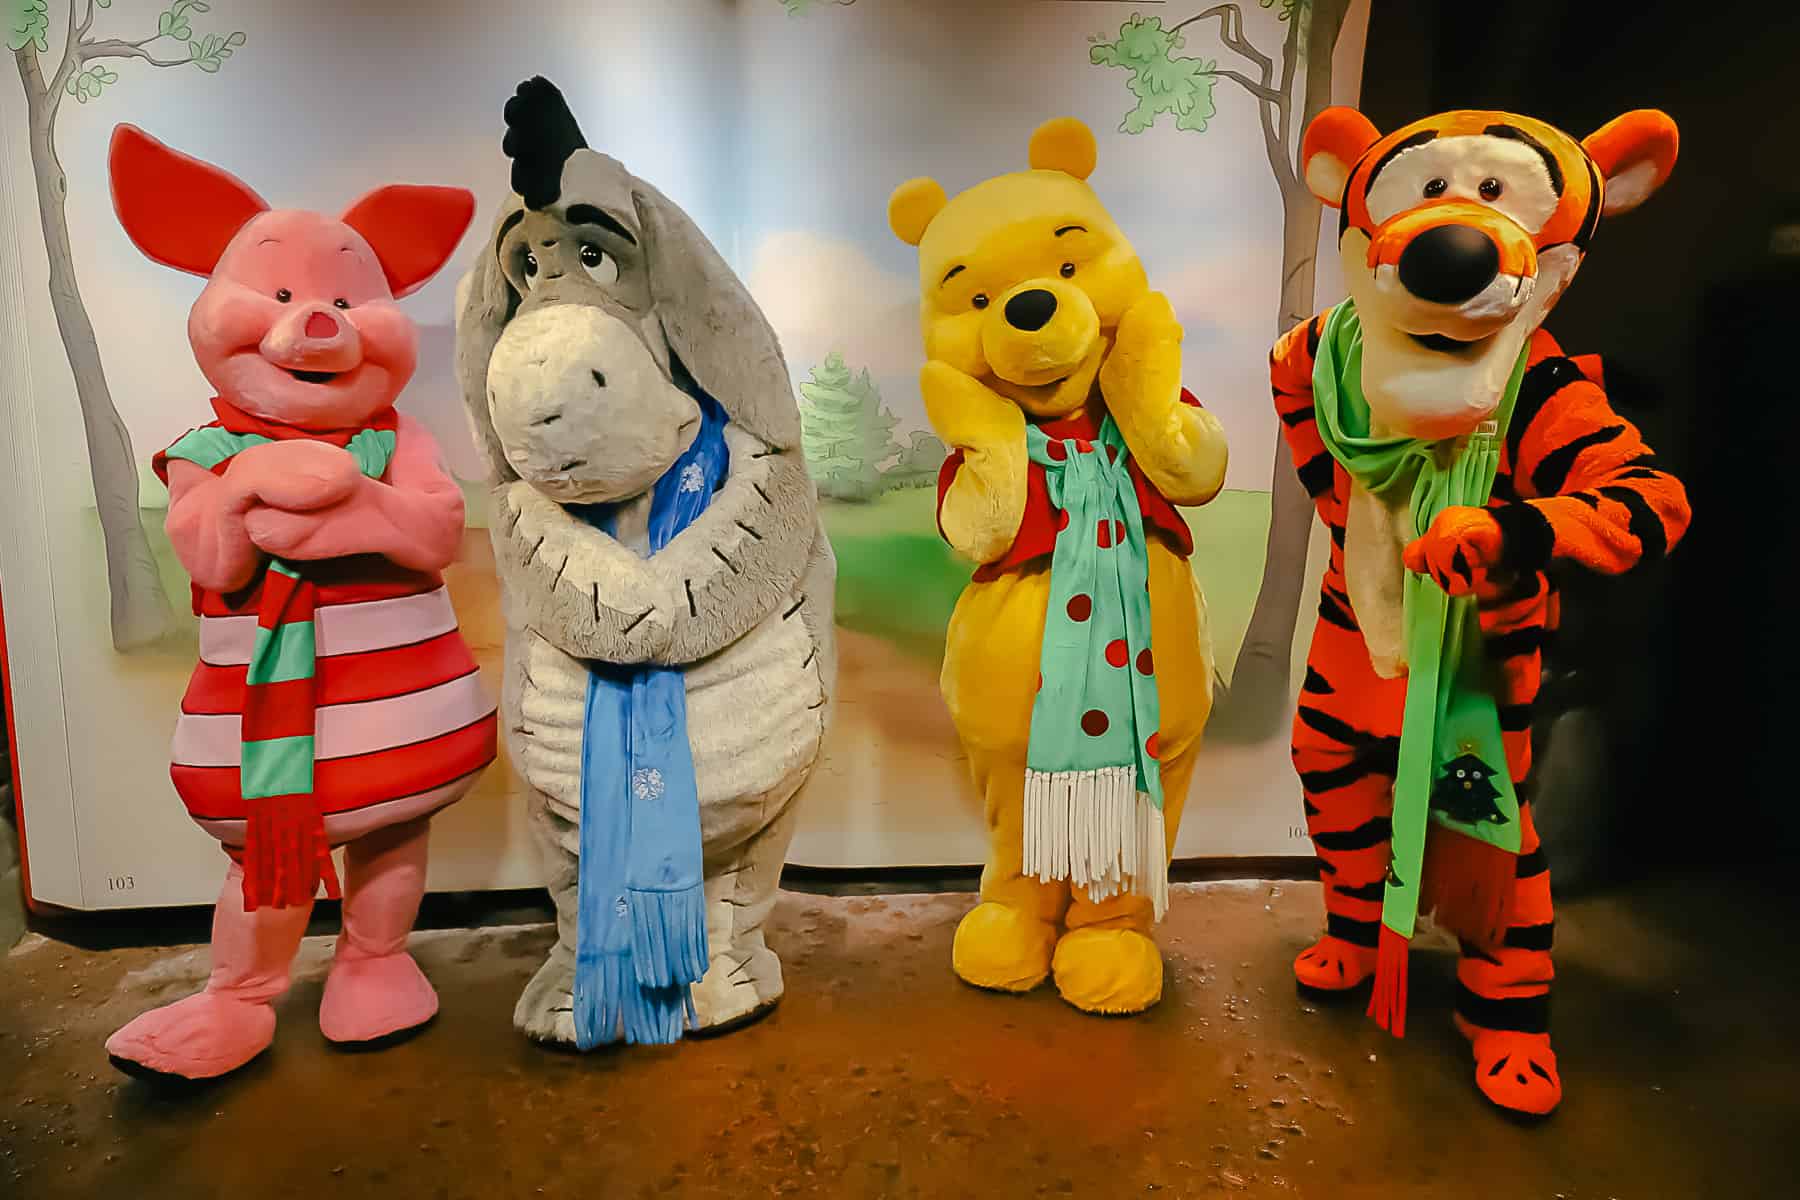 Winnie the Pooh and friends at Mickey's Christmas Party